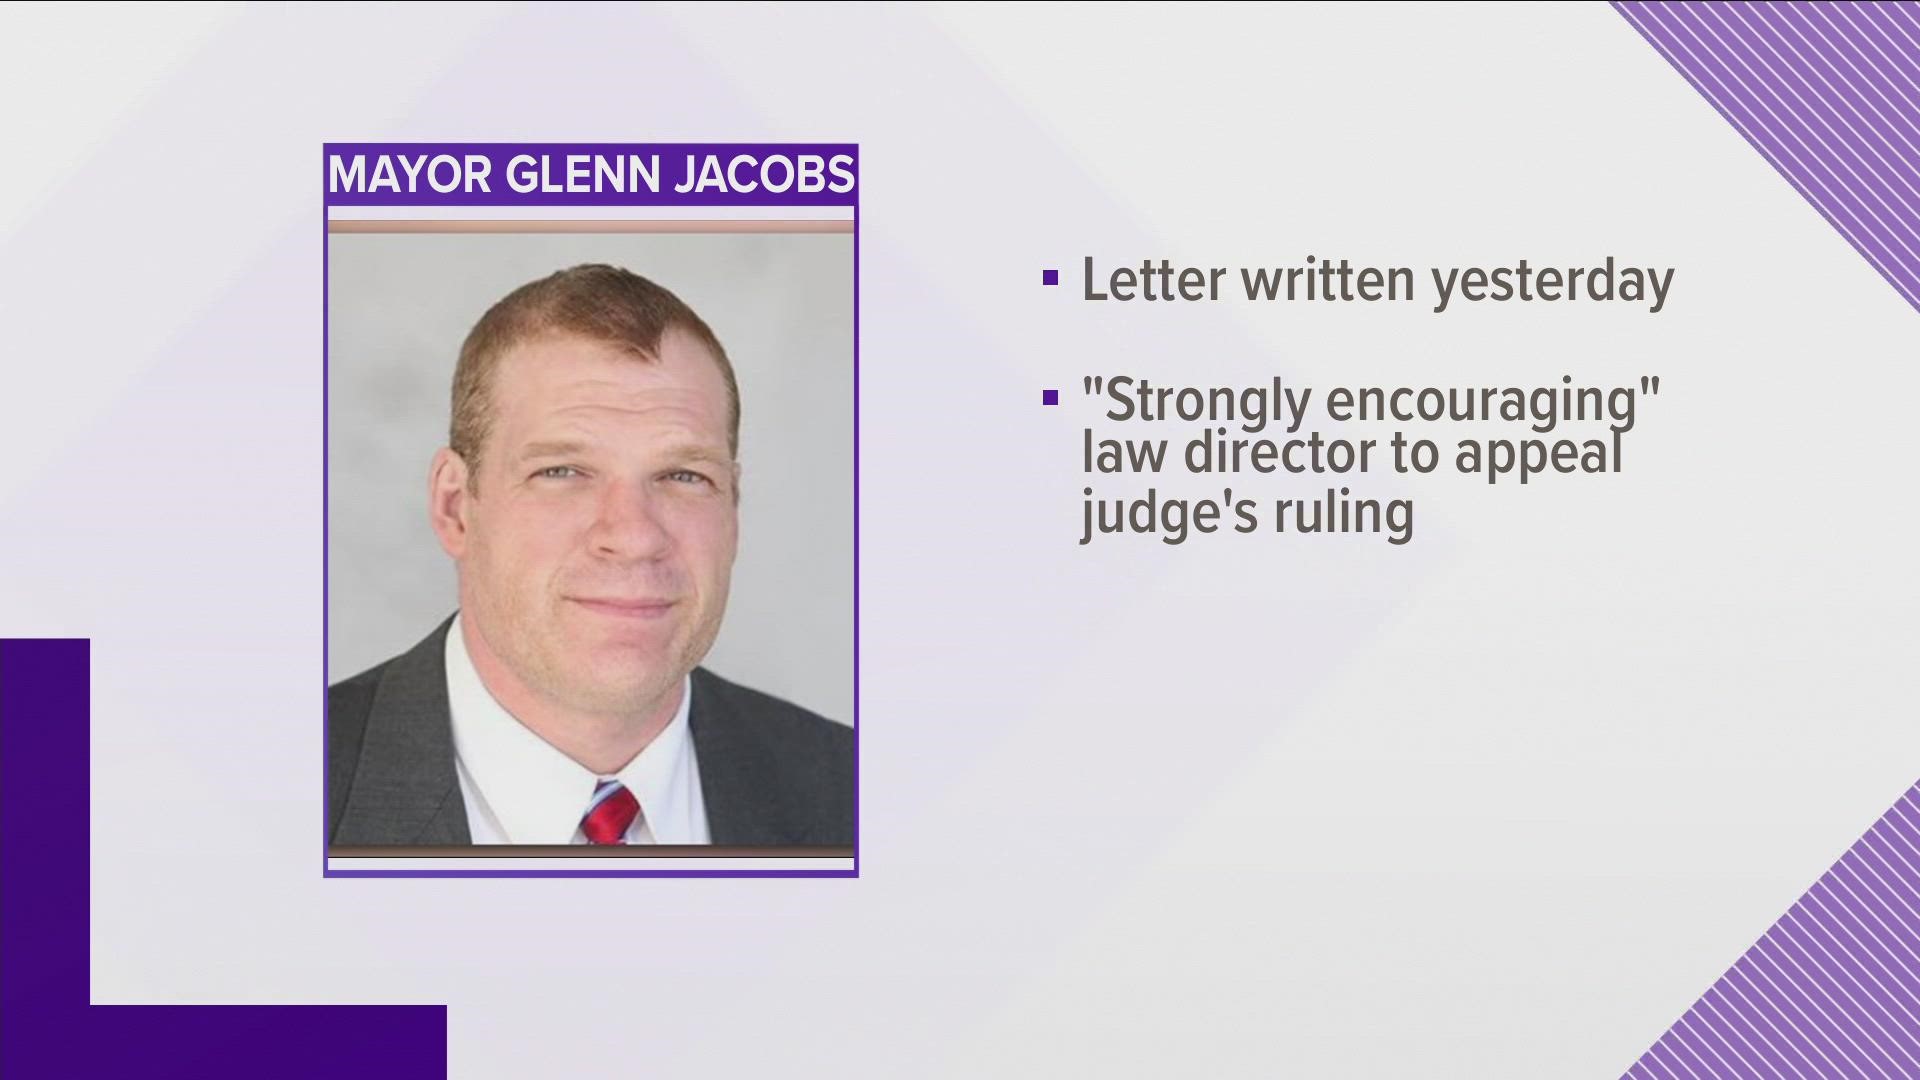 Knox County Mayor Glenn Jacobs is calling for legal action against the federal judge that ordered the mask mandate in Knox County Schools.